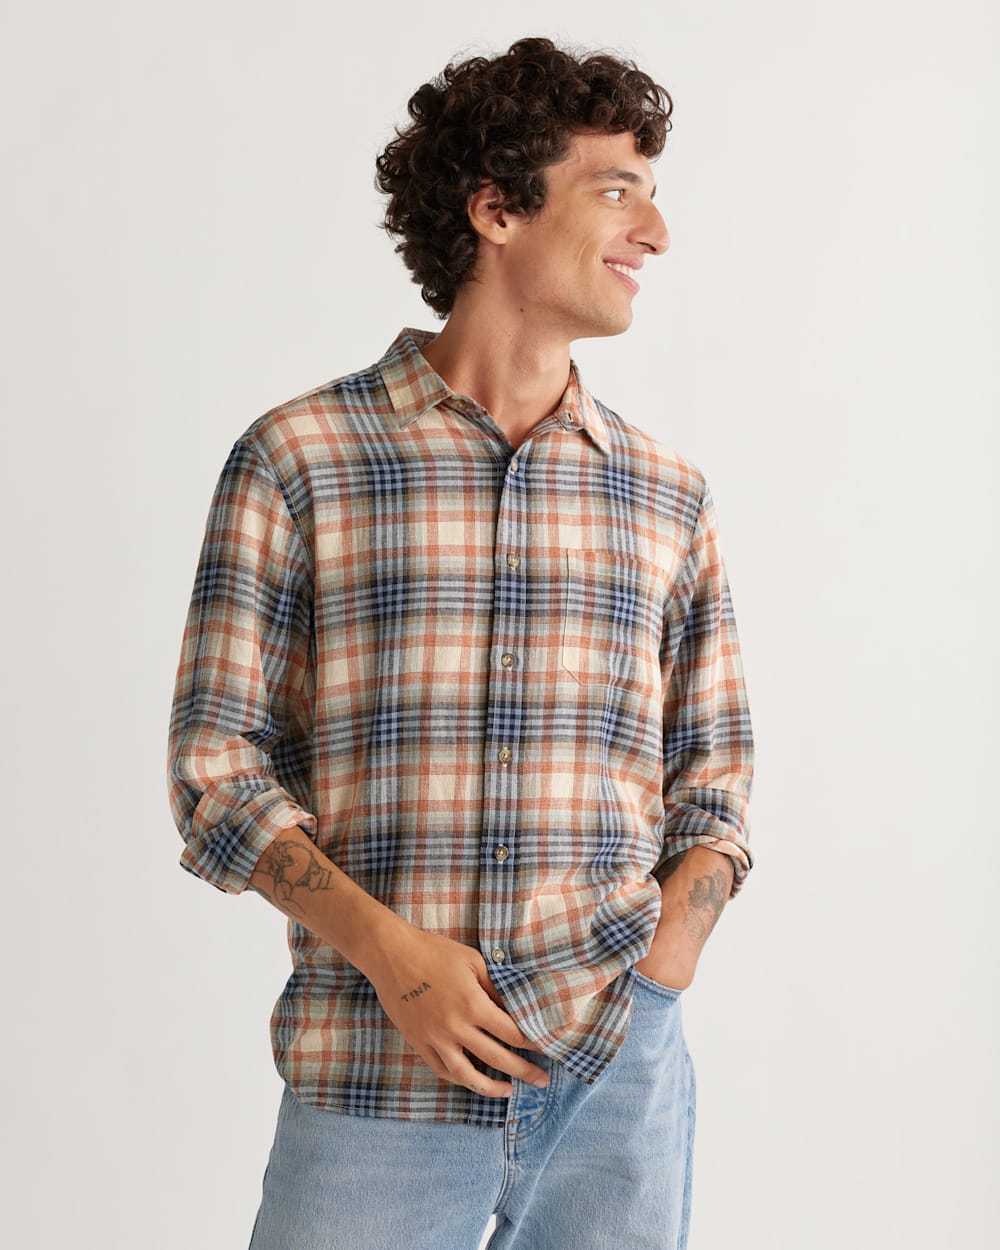 ALTERNATE VIEW OF MEN'S LONG-SLEEVE DAWSON LINEN SHIRT IN RUST/GRAPHITE/STONE PLAID image number 1